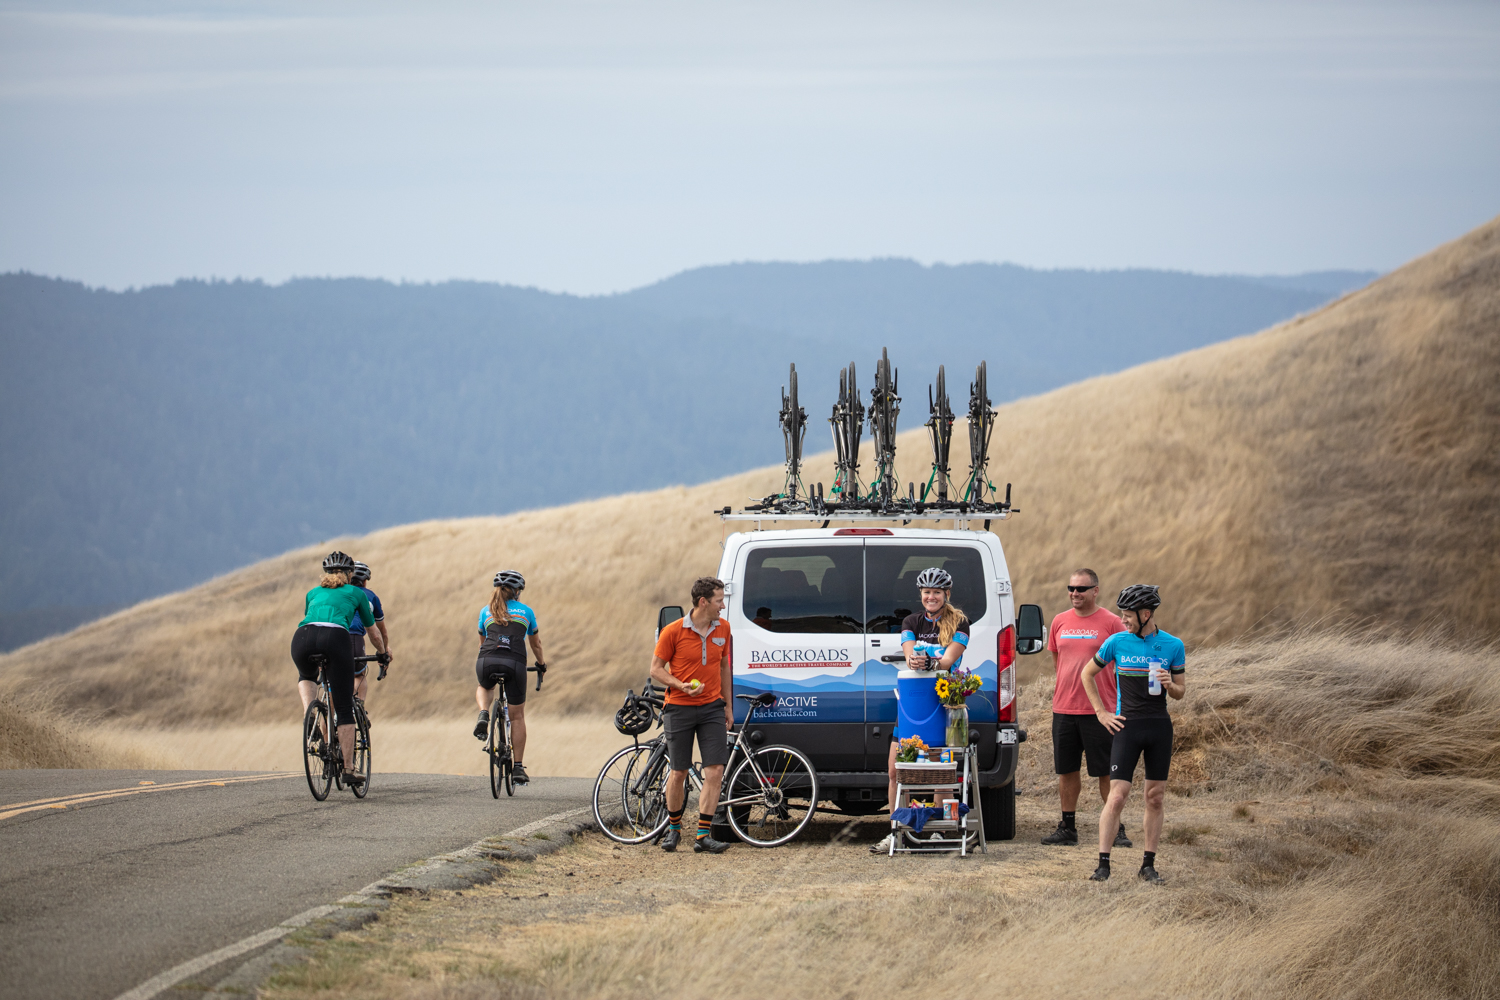 Backroads launches new bike trips for 2019